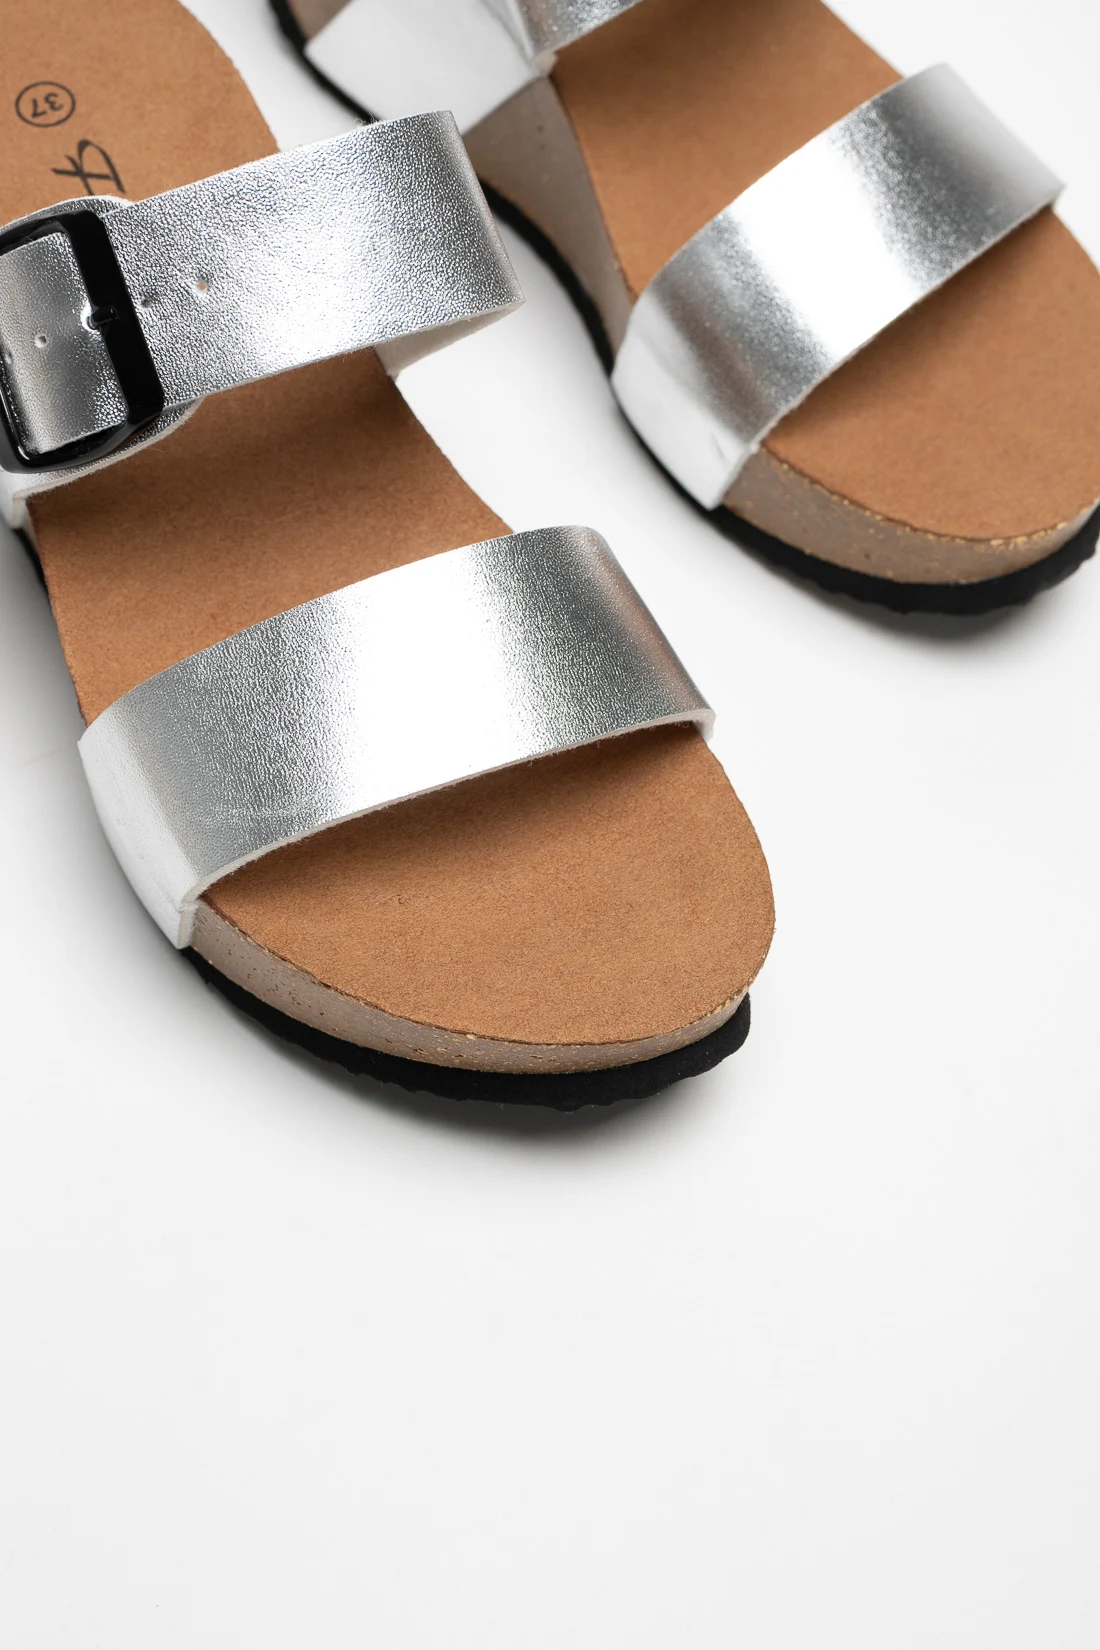 LEATHER SANDALS - SILVER